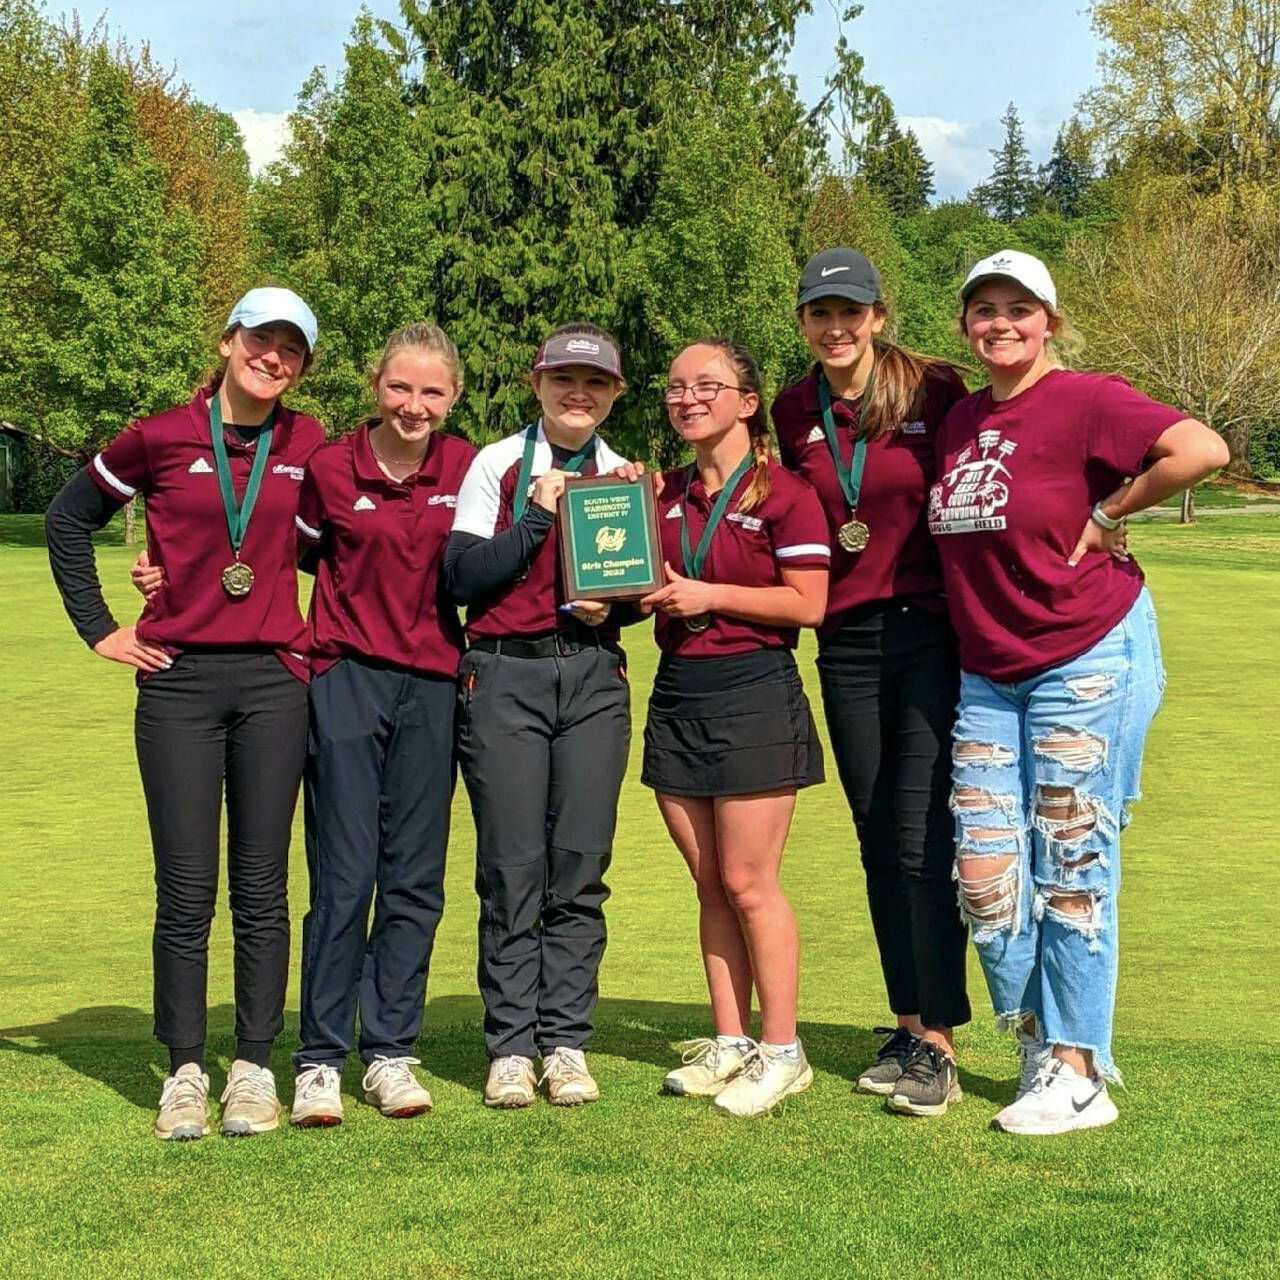 PHOTO BY SHARON GODFREY The Montesano girls golf team of (from left) Maggi Kupka, Jessie LaLonde, Iza Cope, Hailey Blancas, Audree Dohrmann and Kelcey Davis won the 1A District 4 team championship on Tuesday at Tumwater Valley Golf Course. The Bulldogs were led by Blancas, who won the individual title by two strokes with a score of 170.